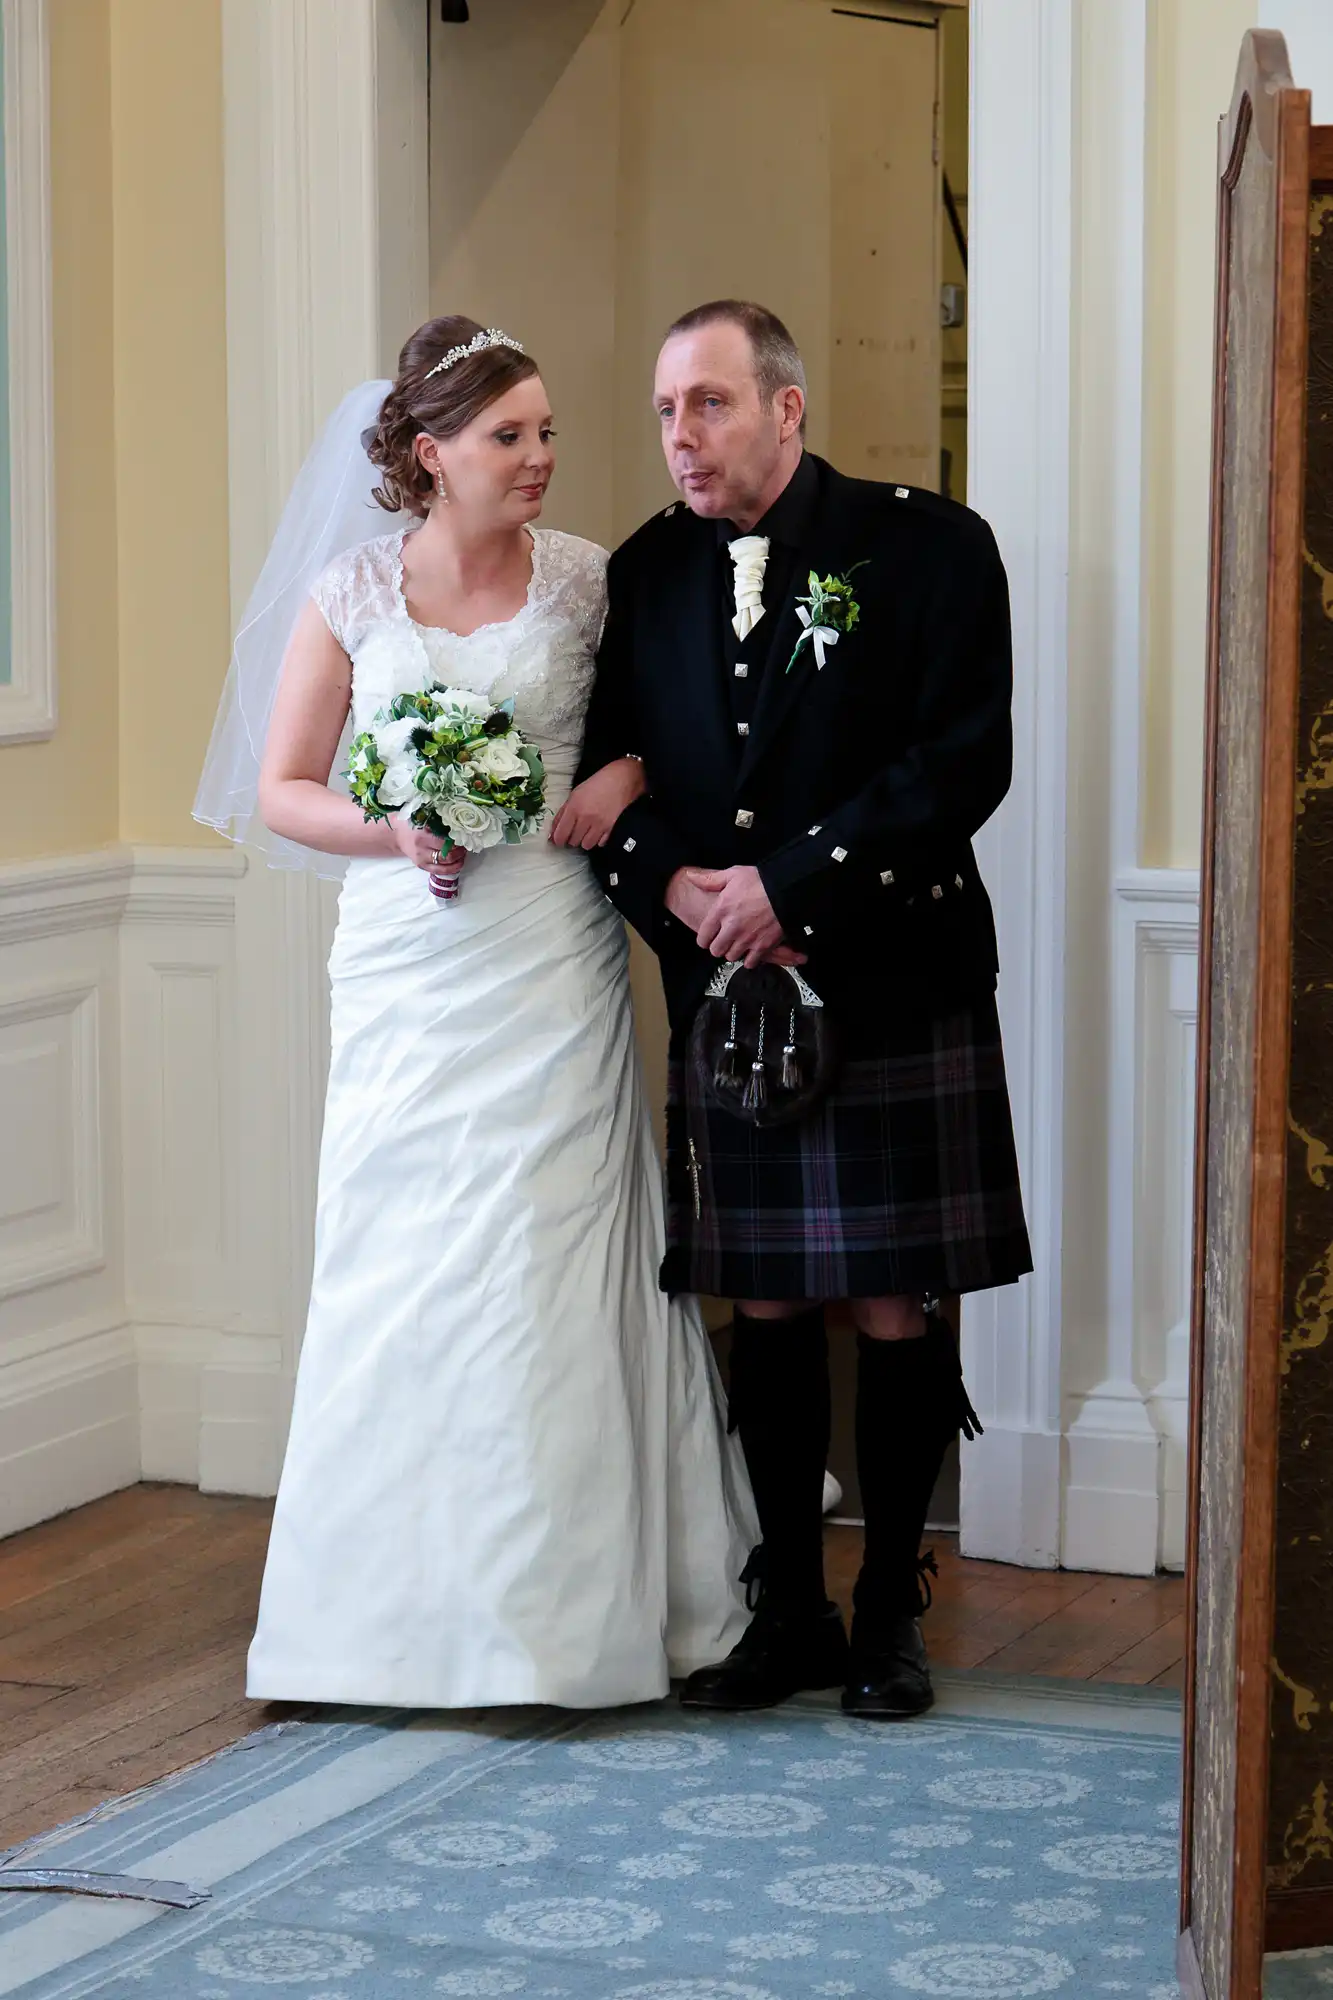 A bride in a white dress and a groom in a kilt standing together in a doorway, both looking away from the camera.